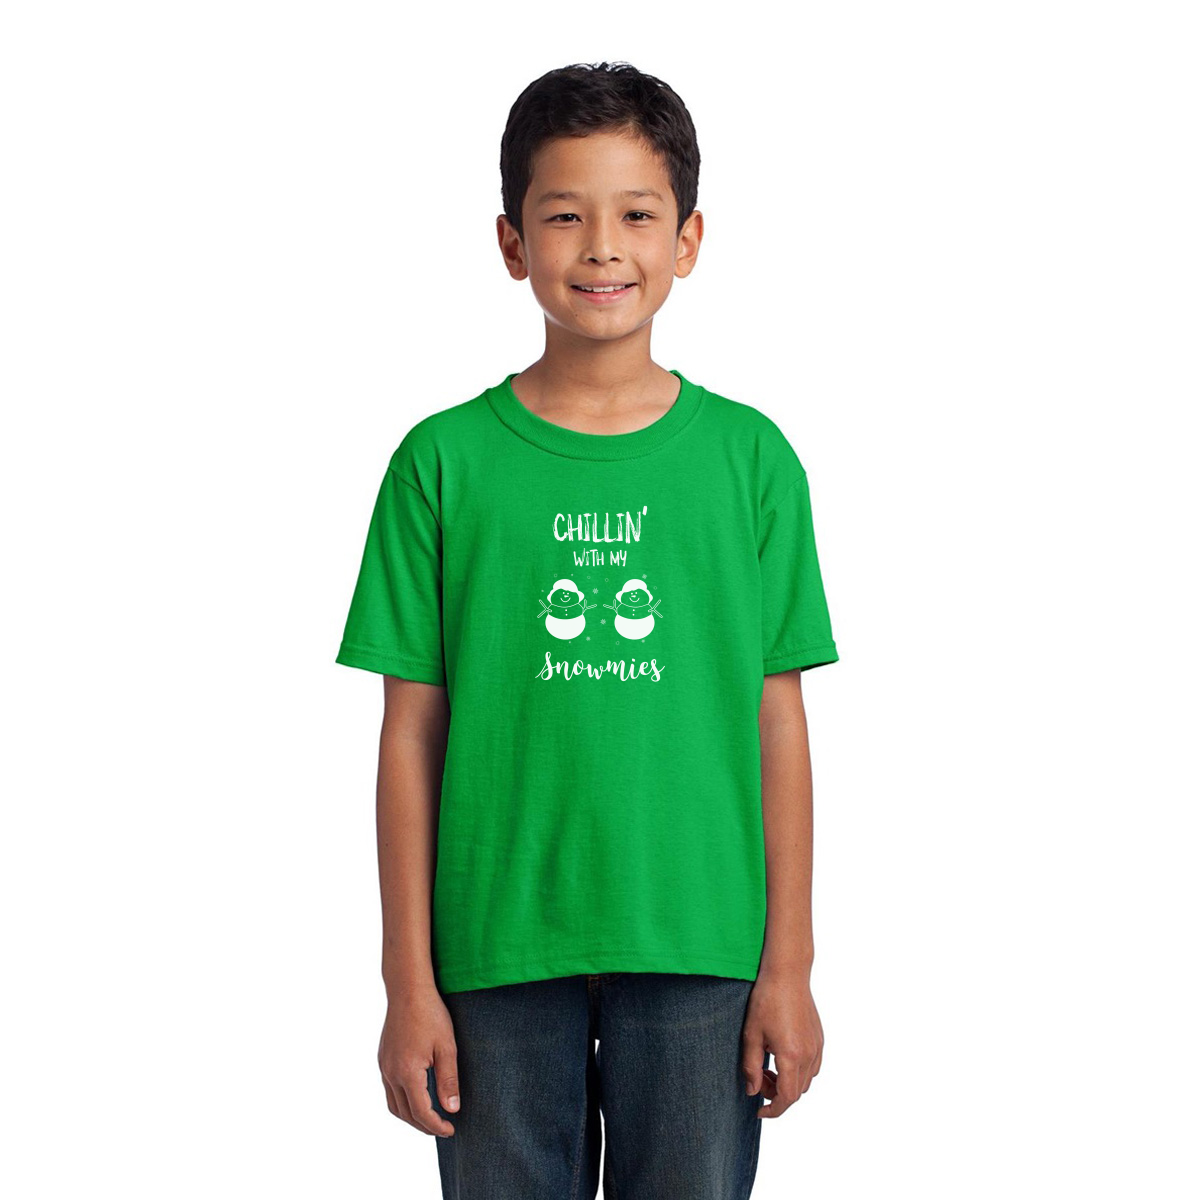 Chillin' With My Snowmies Kids T-shirt | Green